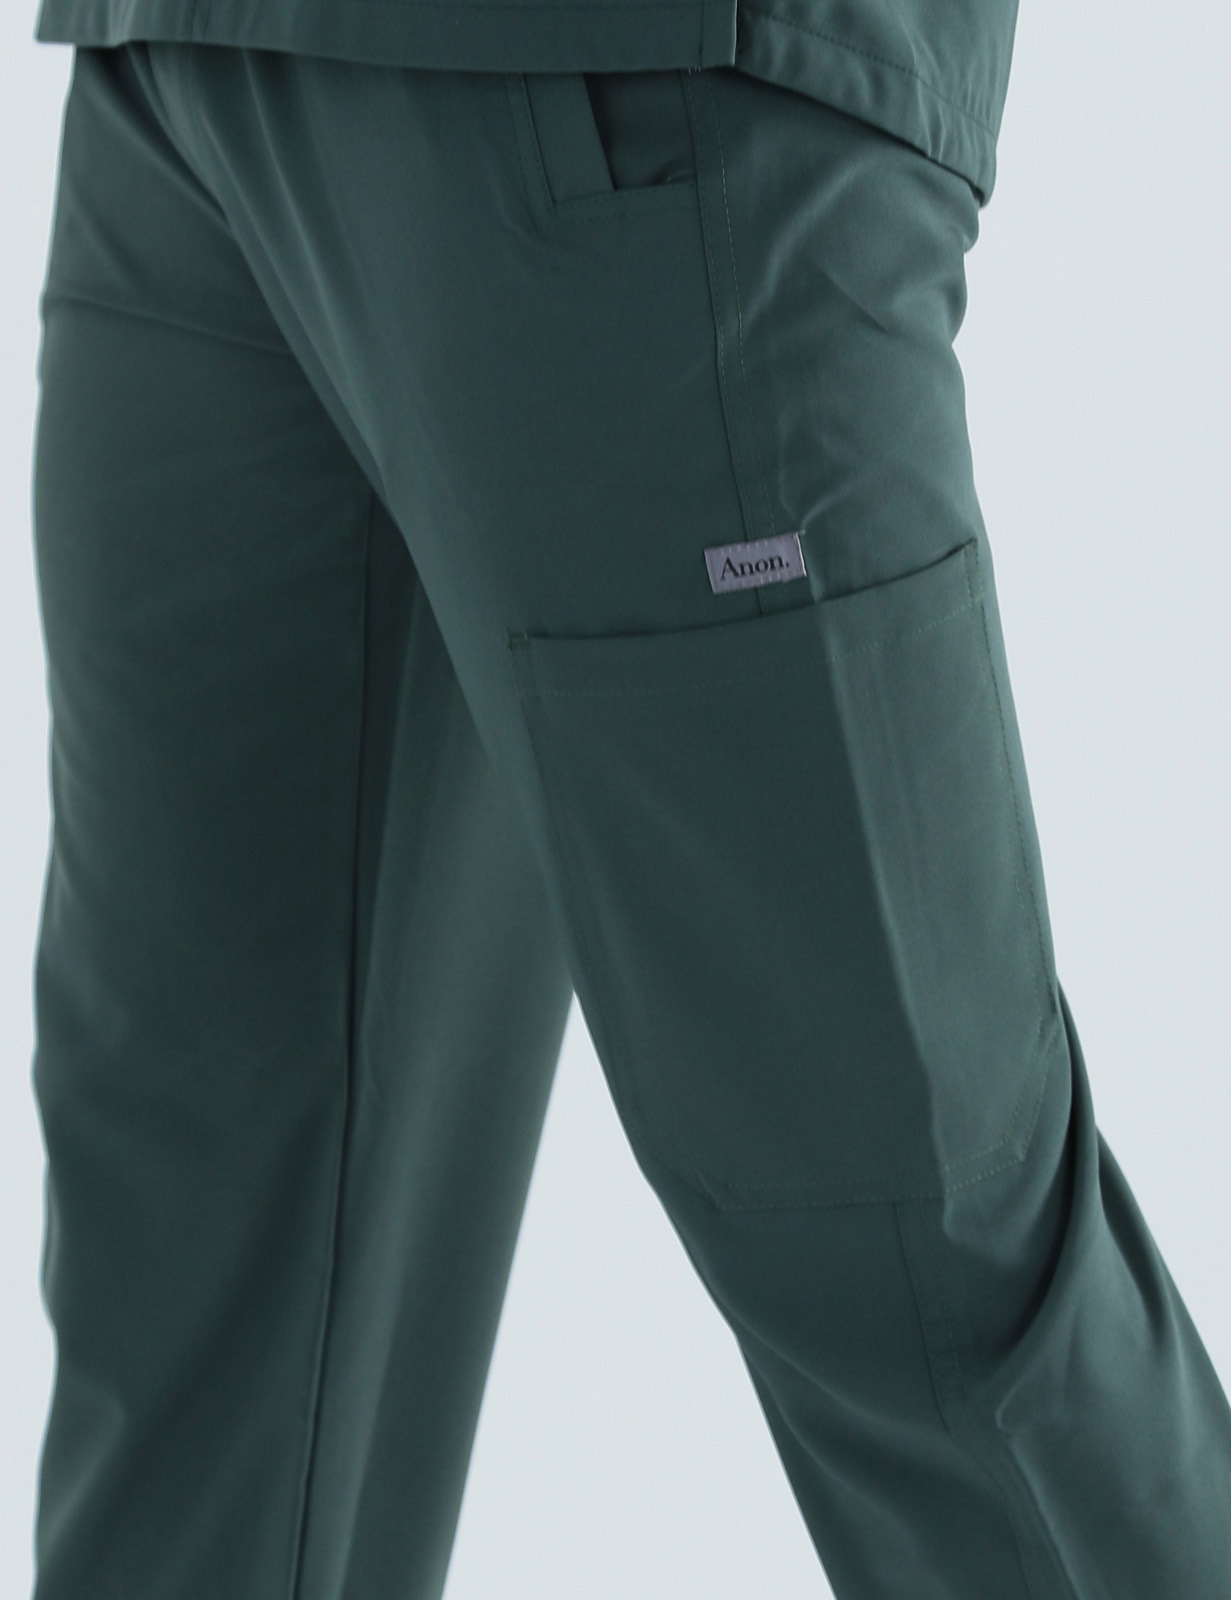 Anon Men's Scrub Pants (Stealth Collection) Poly/Spandex - Forest Green - X Small